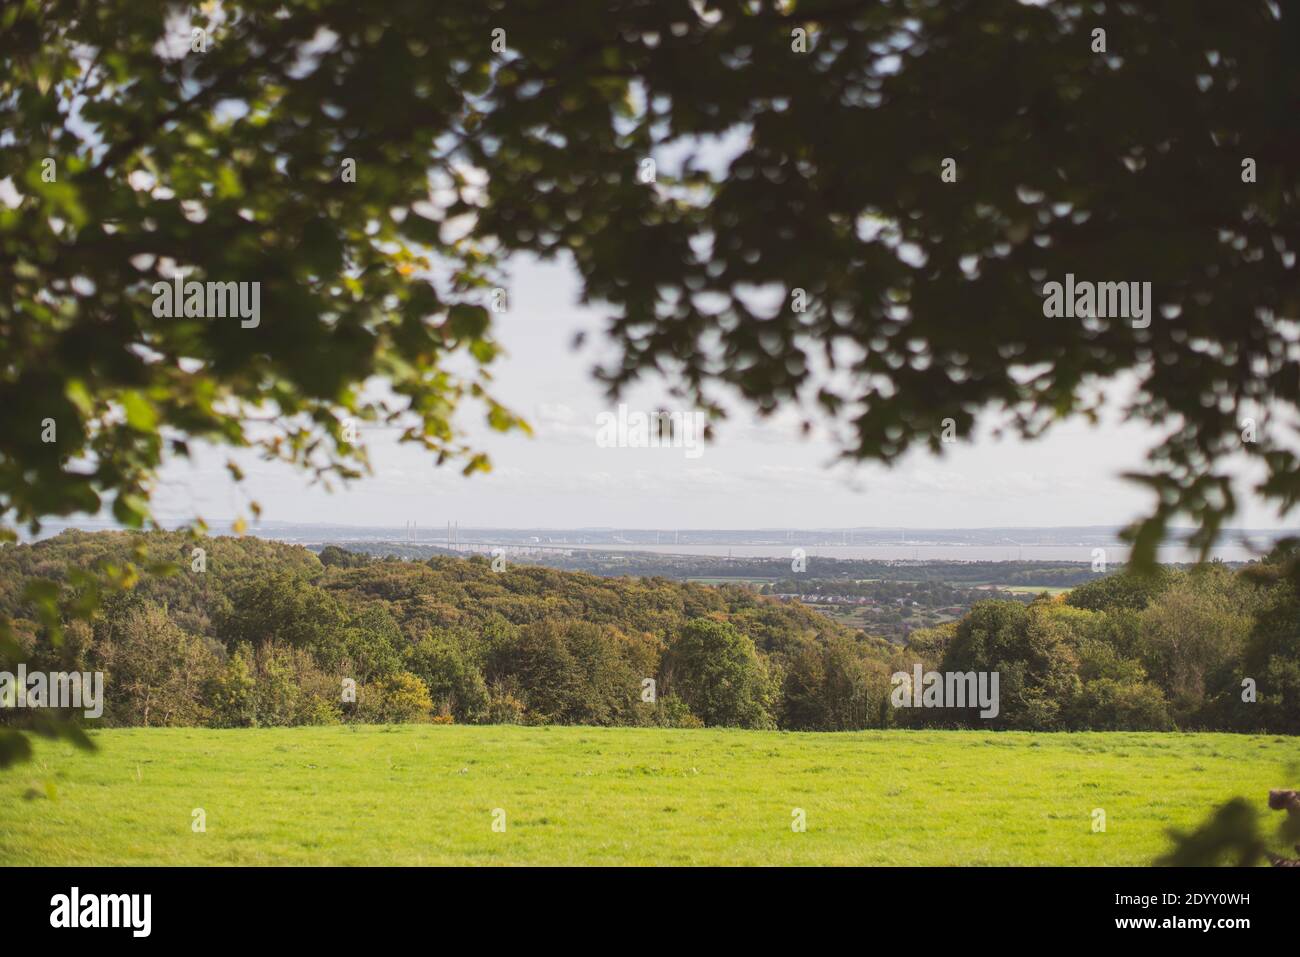 View across farm fields and the River Severn from Wales with the Prince of Wales Bridge (Severn Bridge) and coastline of England in the distance. Stock Photo